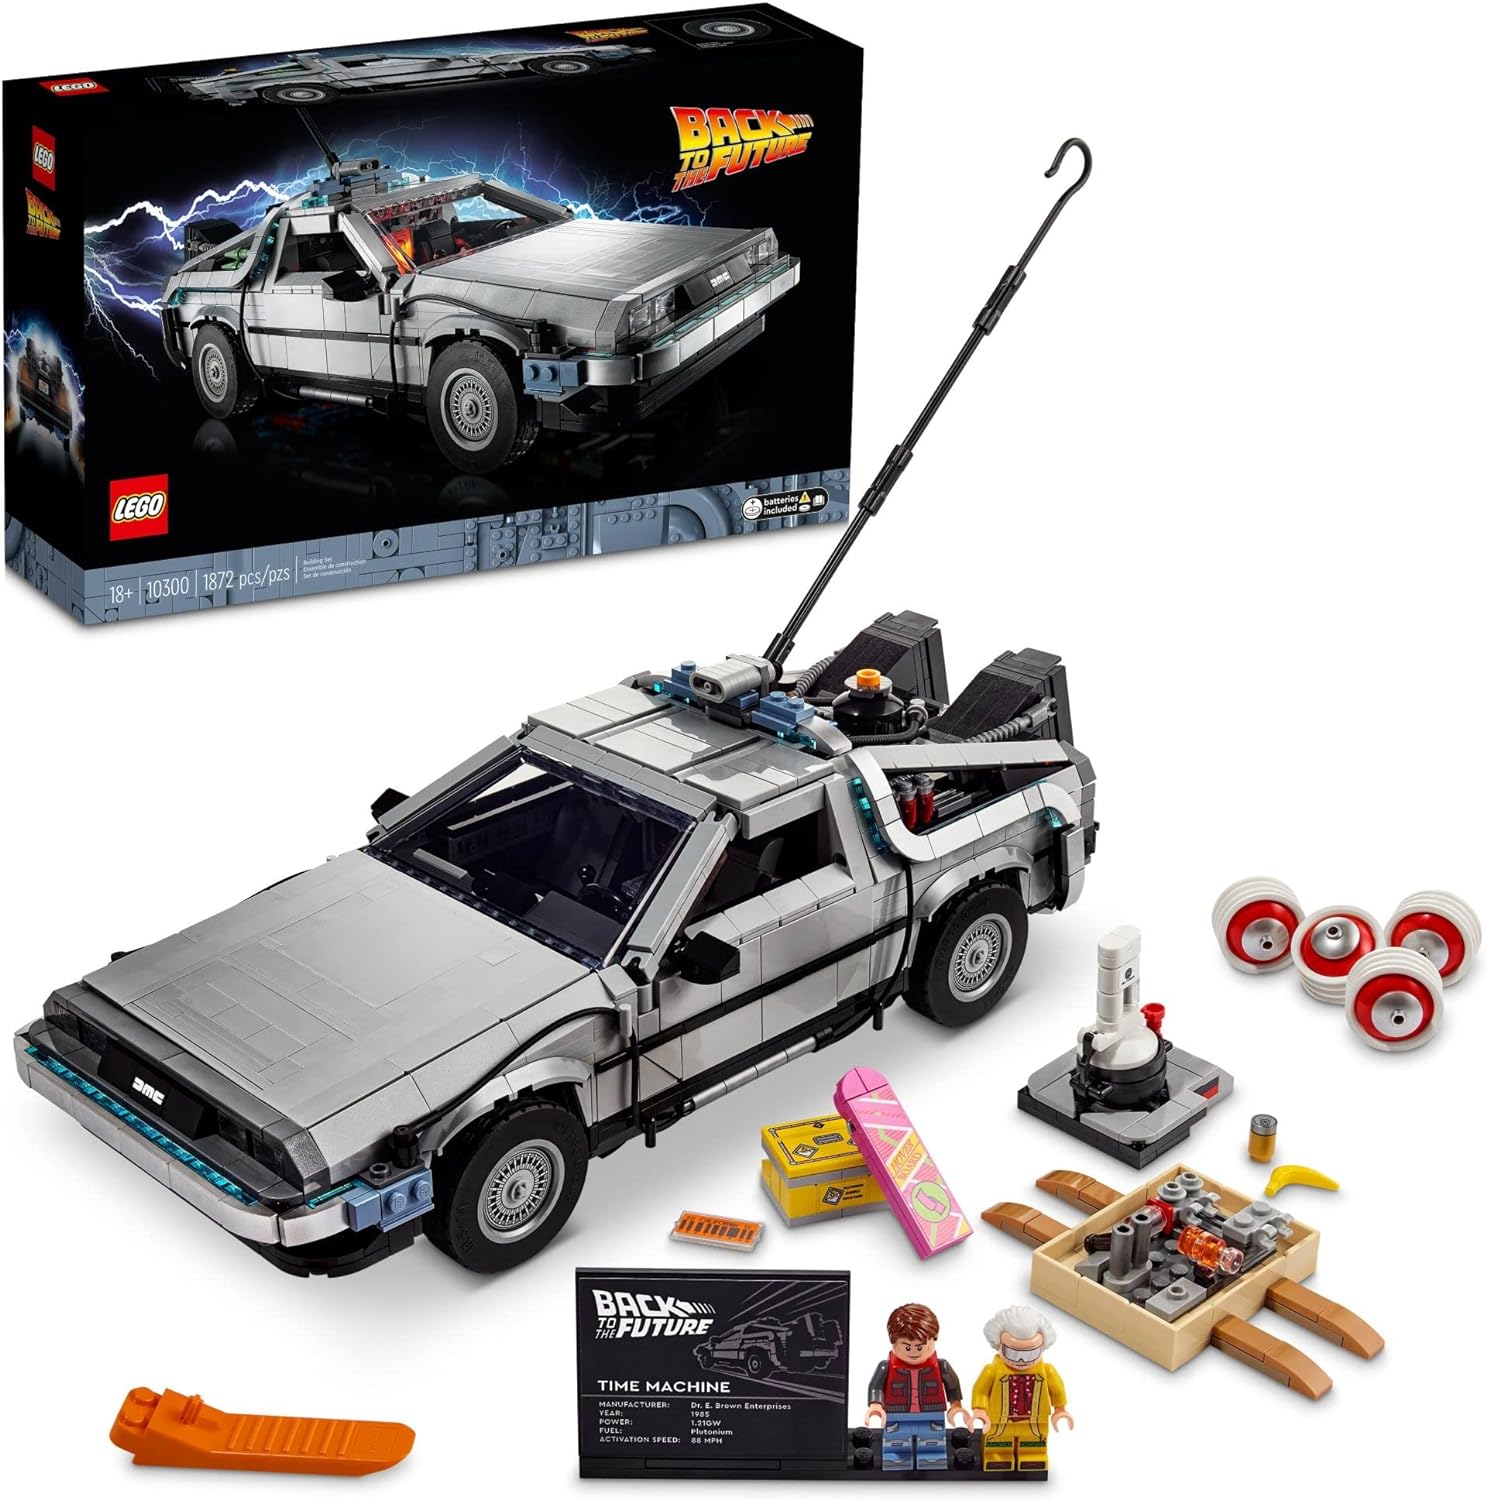 1,872-Piece LEGO Icons: Back to the Future Time Machine Model Car Building Kit (10300) $160 + Free Shipping